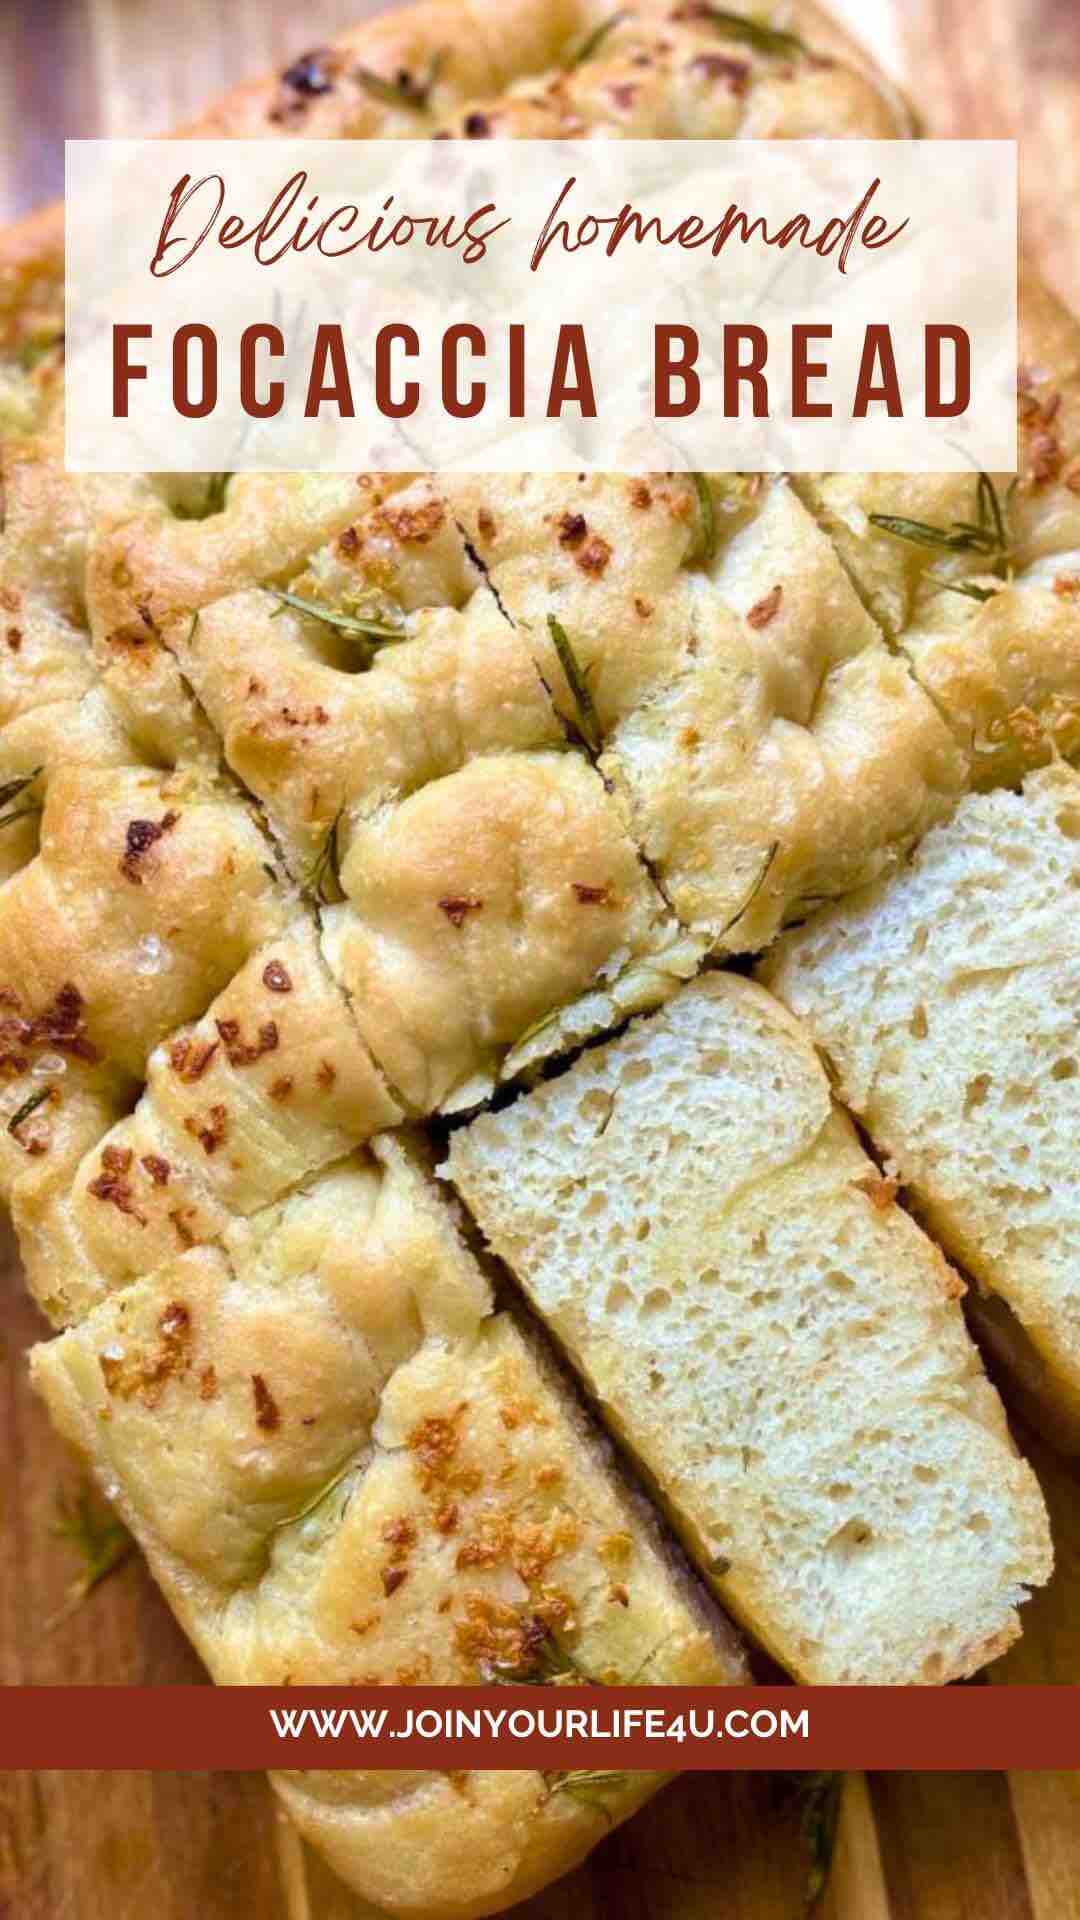 Sliced Italian focaccia bread on a wooden chopping board, showcasing its crispy crust and soft, airy interior, drizzled with olive oil and sprinkled with rosemary and sea salt